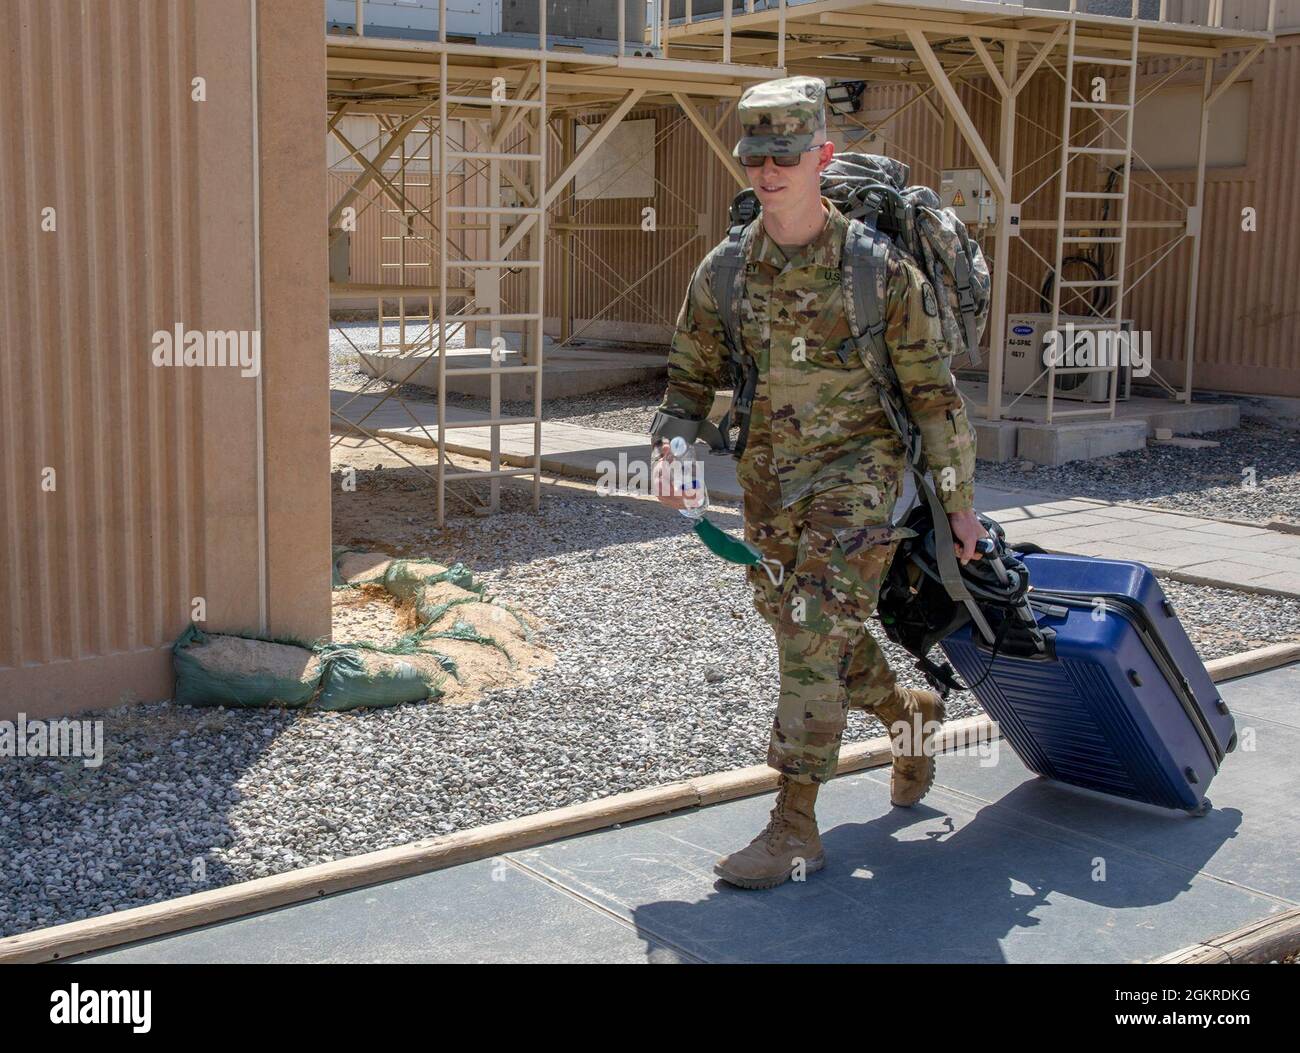 Sgt. Brandon Brantley, a Chemical, Biological, Radiological, and Nuclear Specialist with 25th Strategic Signal Battalion, makes his way to the barracks during in-processing for the U.S. Army Central 2021 Best Warrior Competition at Camp Arifjan, Kuwait, June 20, 2021. Eleven Soldiers will compete in various events that will test their physical and mental readiness as well as their technical and tactical knowledge. Stock Photo